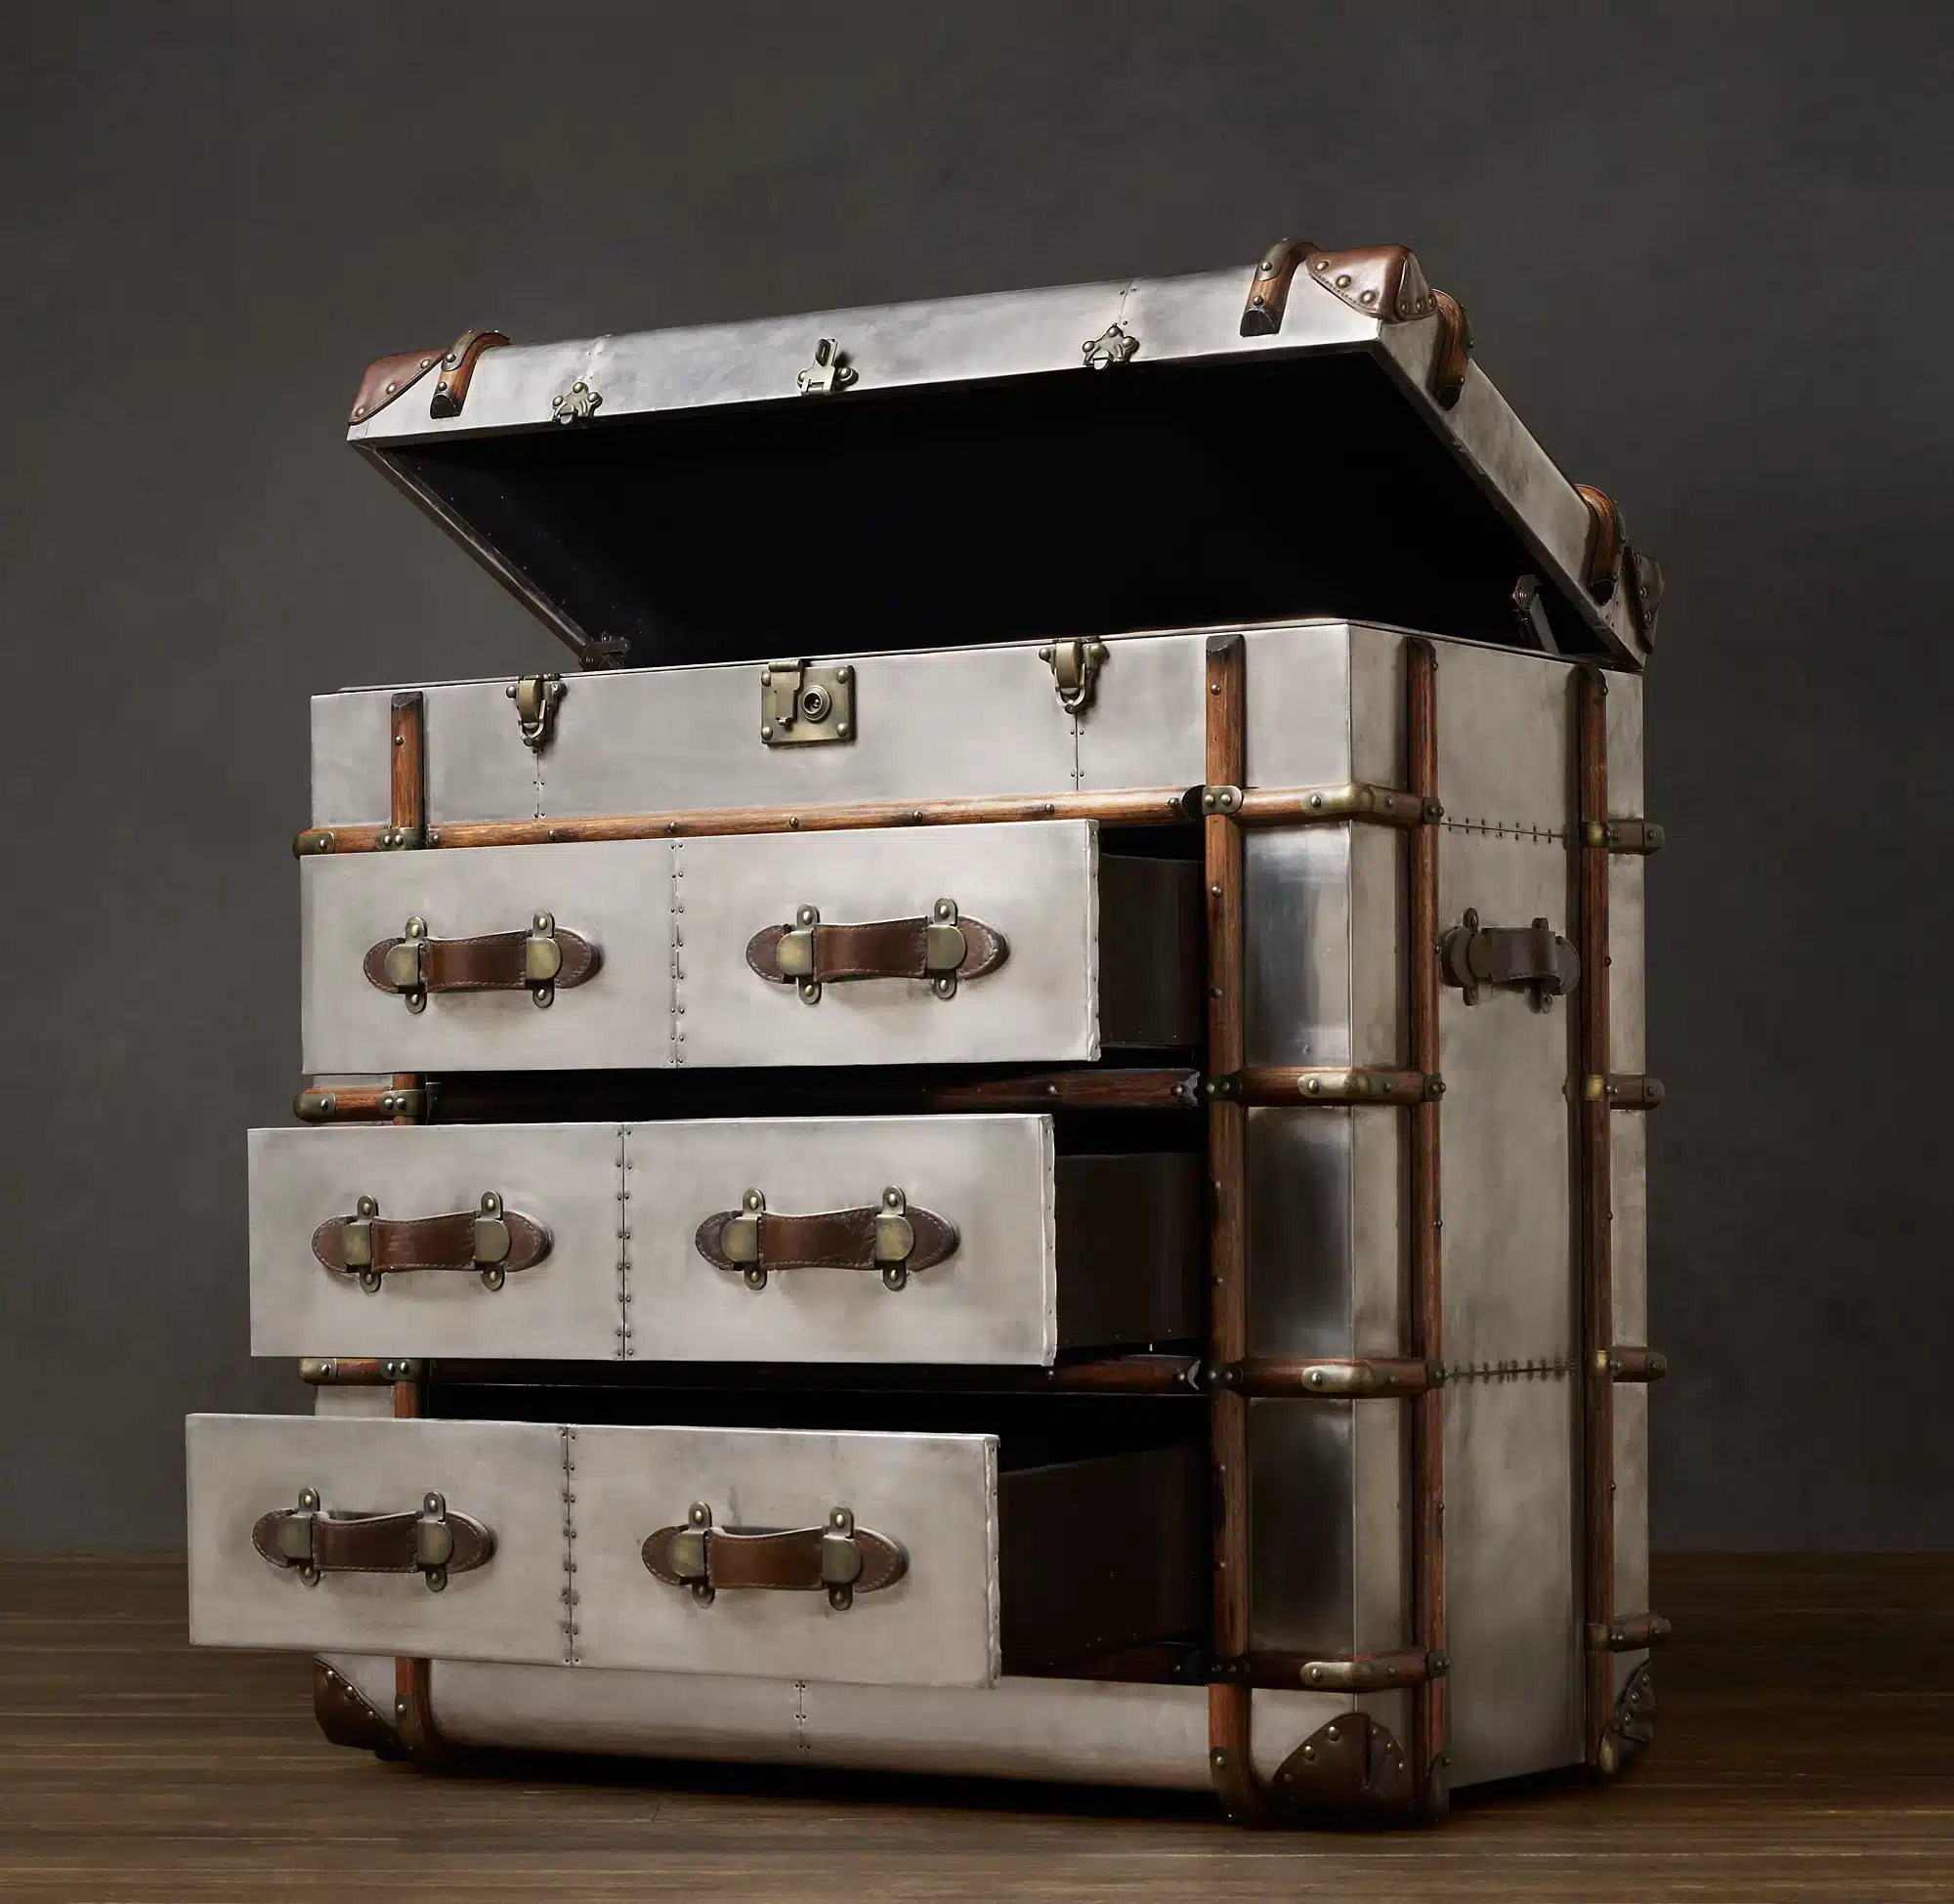 The Richards' Trunk chest medium is inspired by a worn, custom-made steamer Trunk.